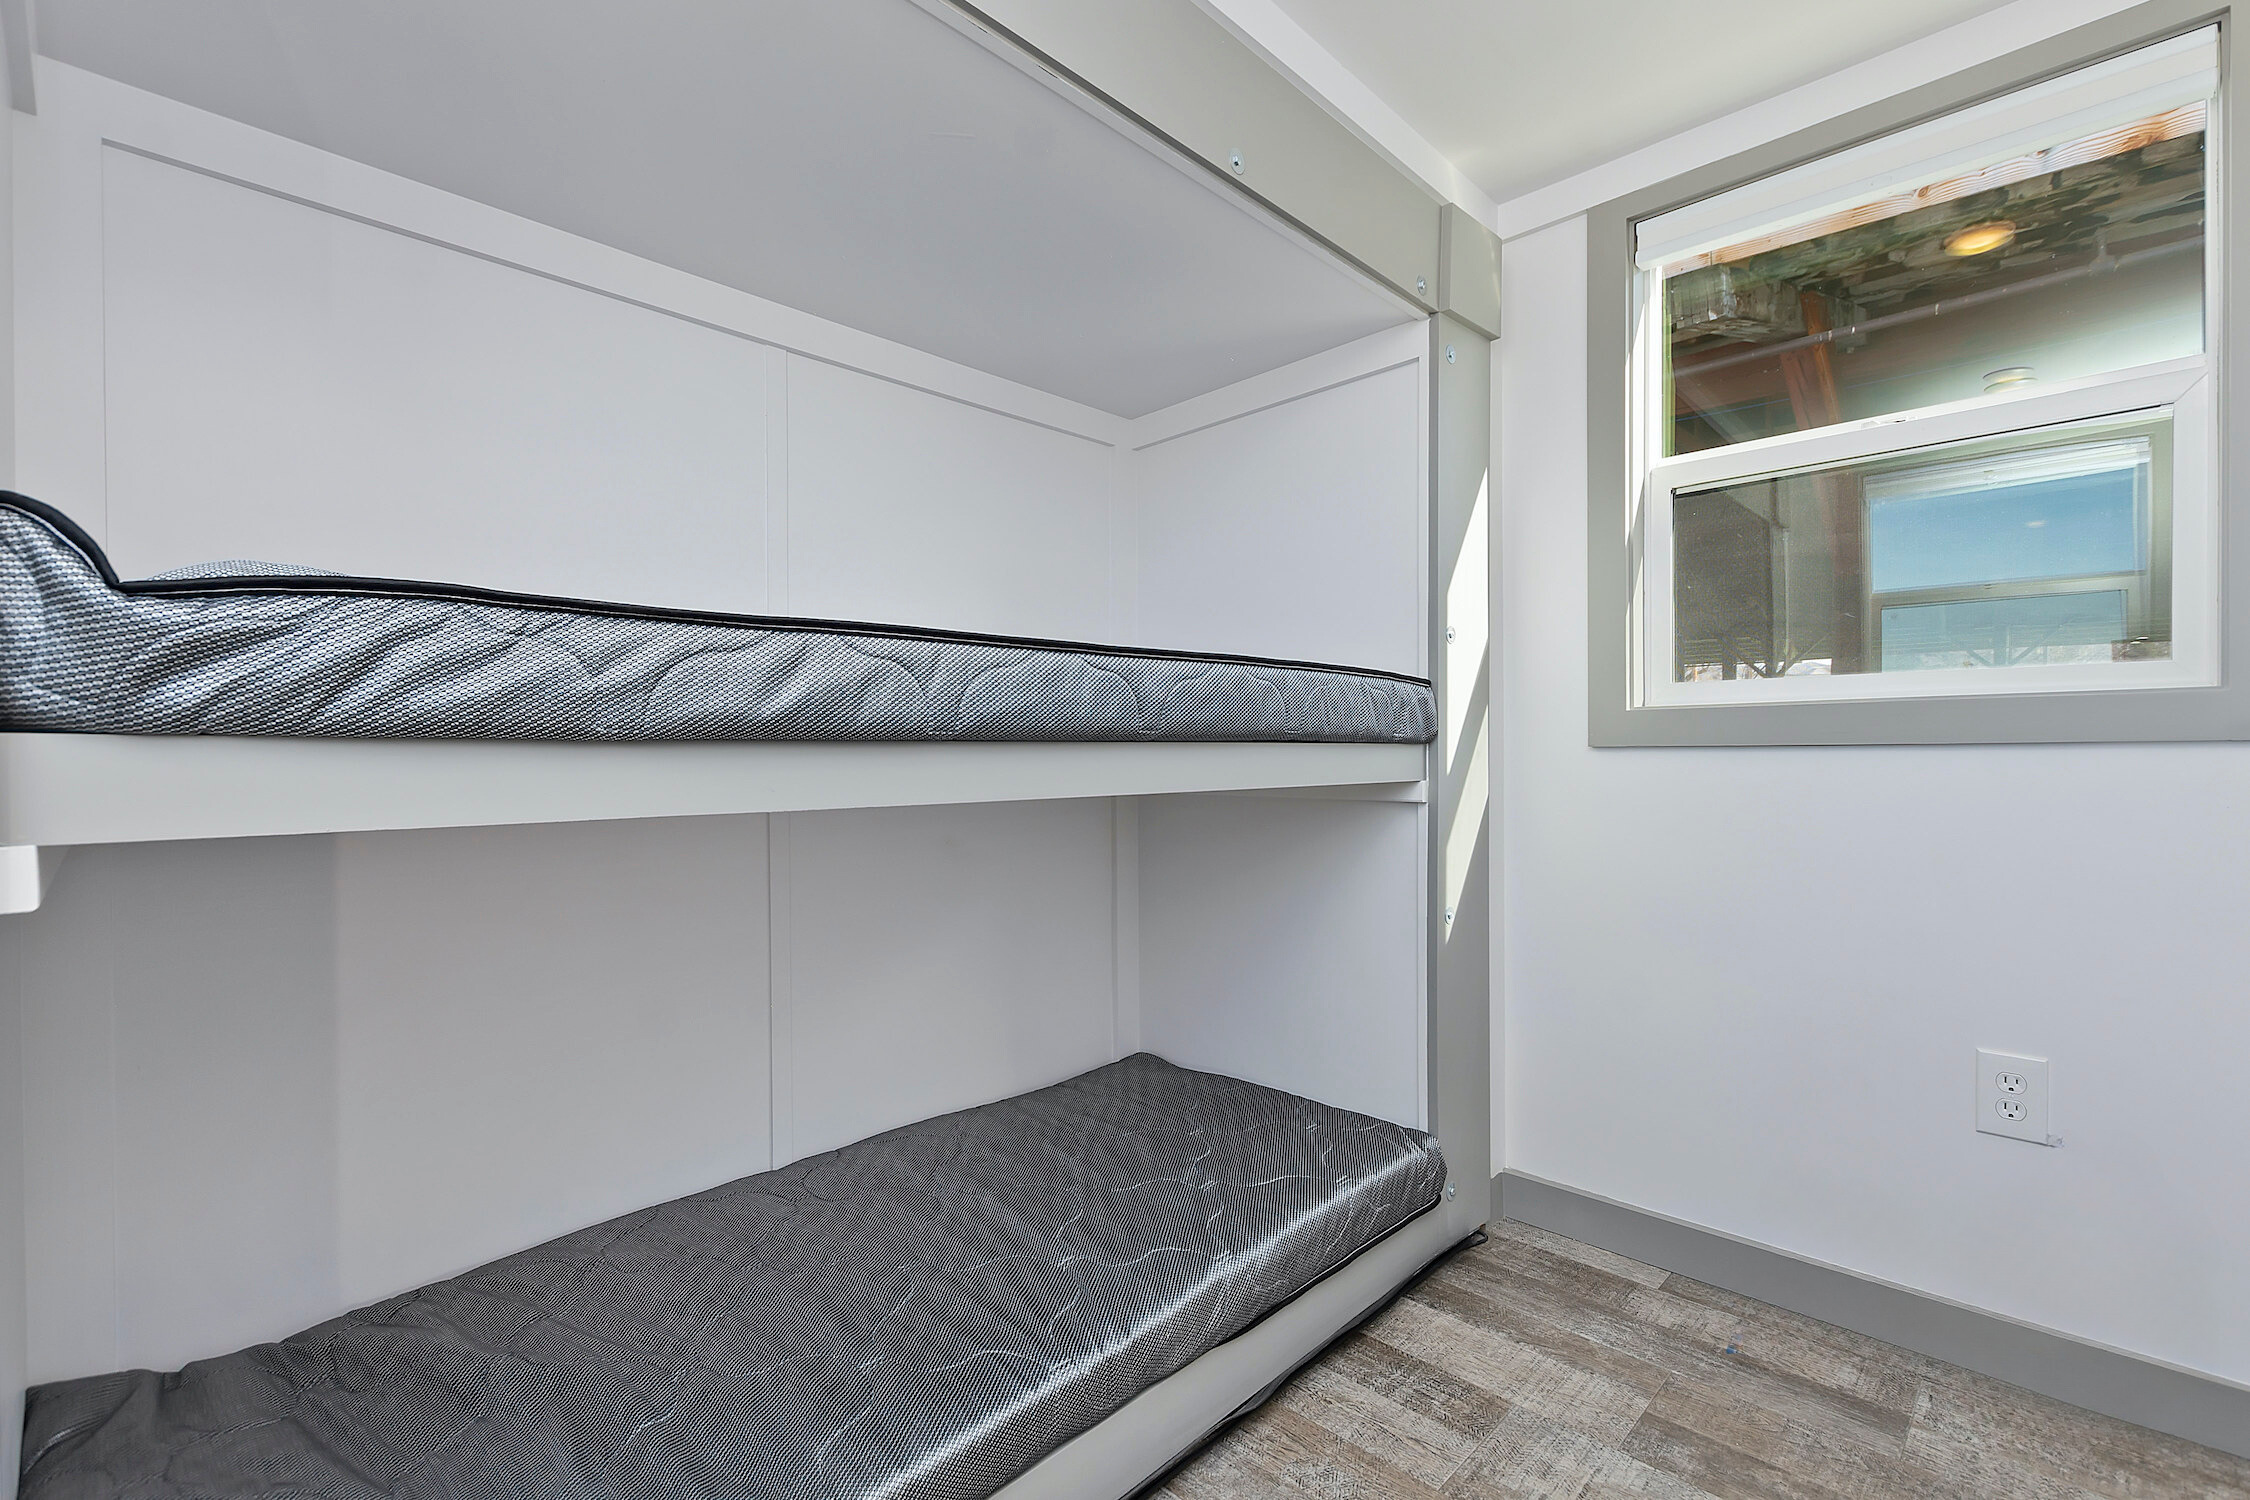 Bunk beds in kids room with grey sheets